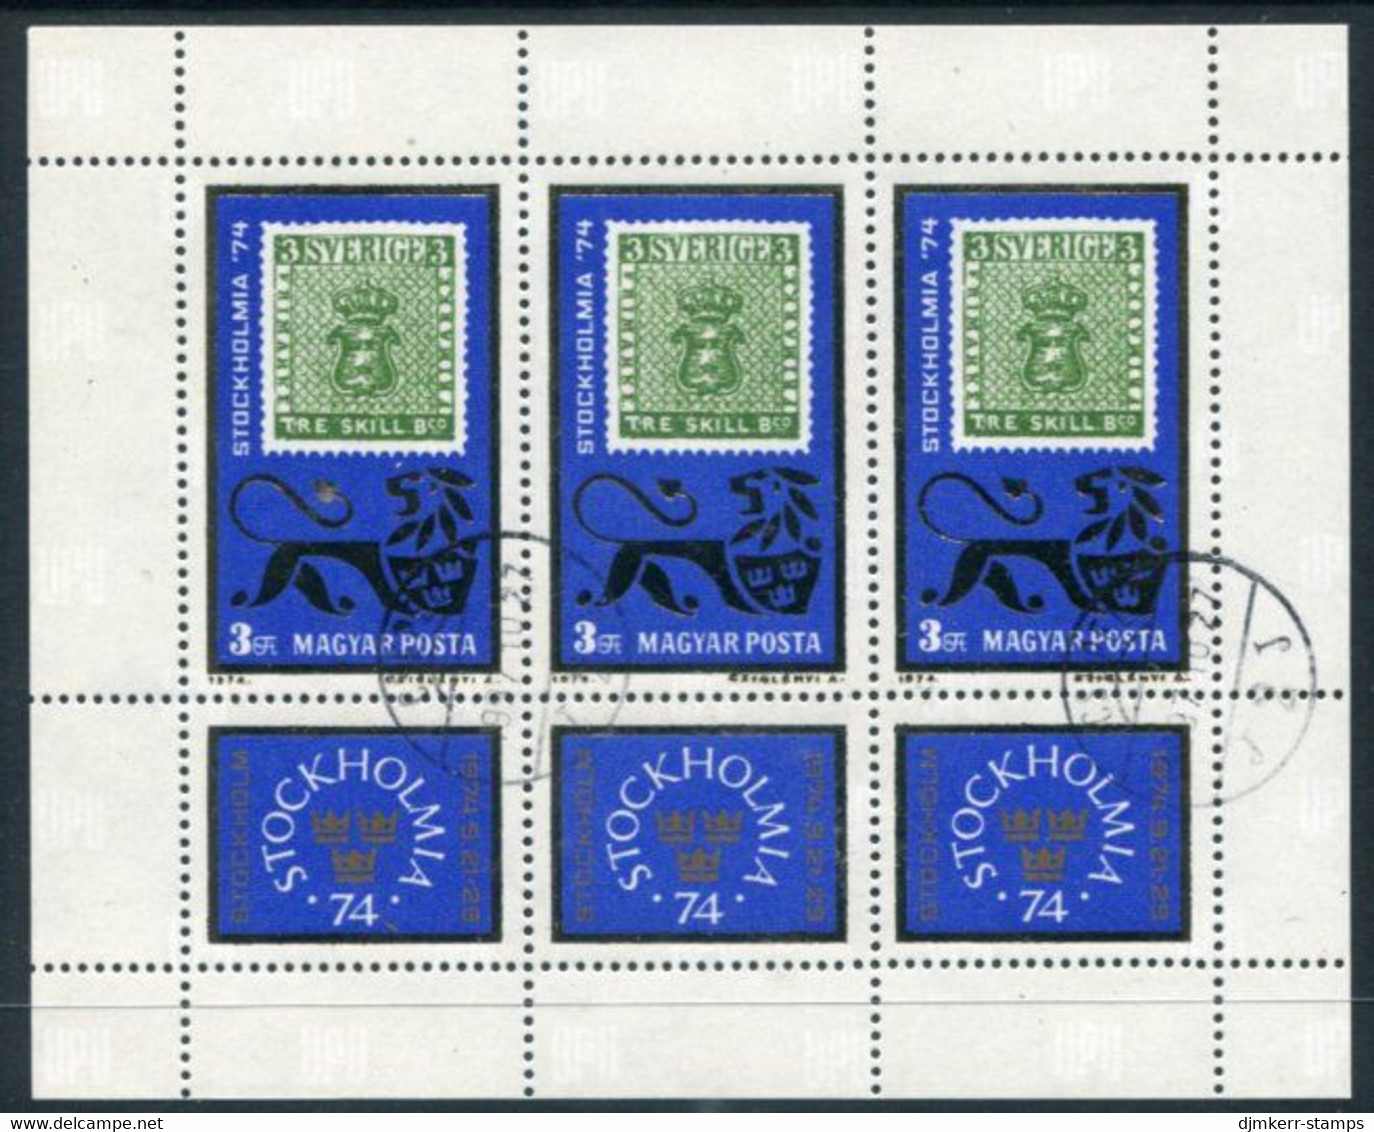 HUNGARY 1974 STOCKHOLMIA Stamp Exhibition Sheetlet Used.  Michel 2981 Kb - Used Stamps